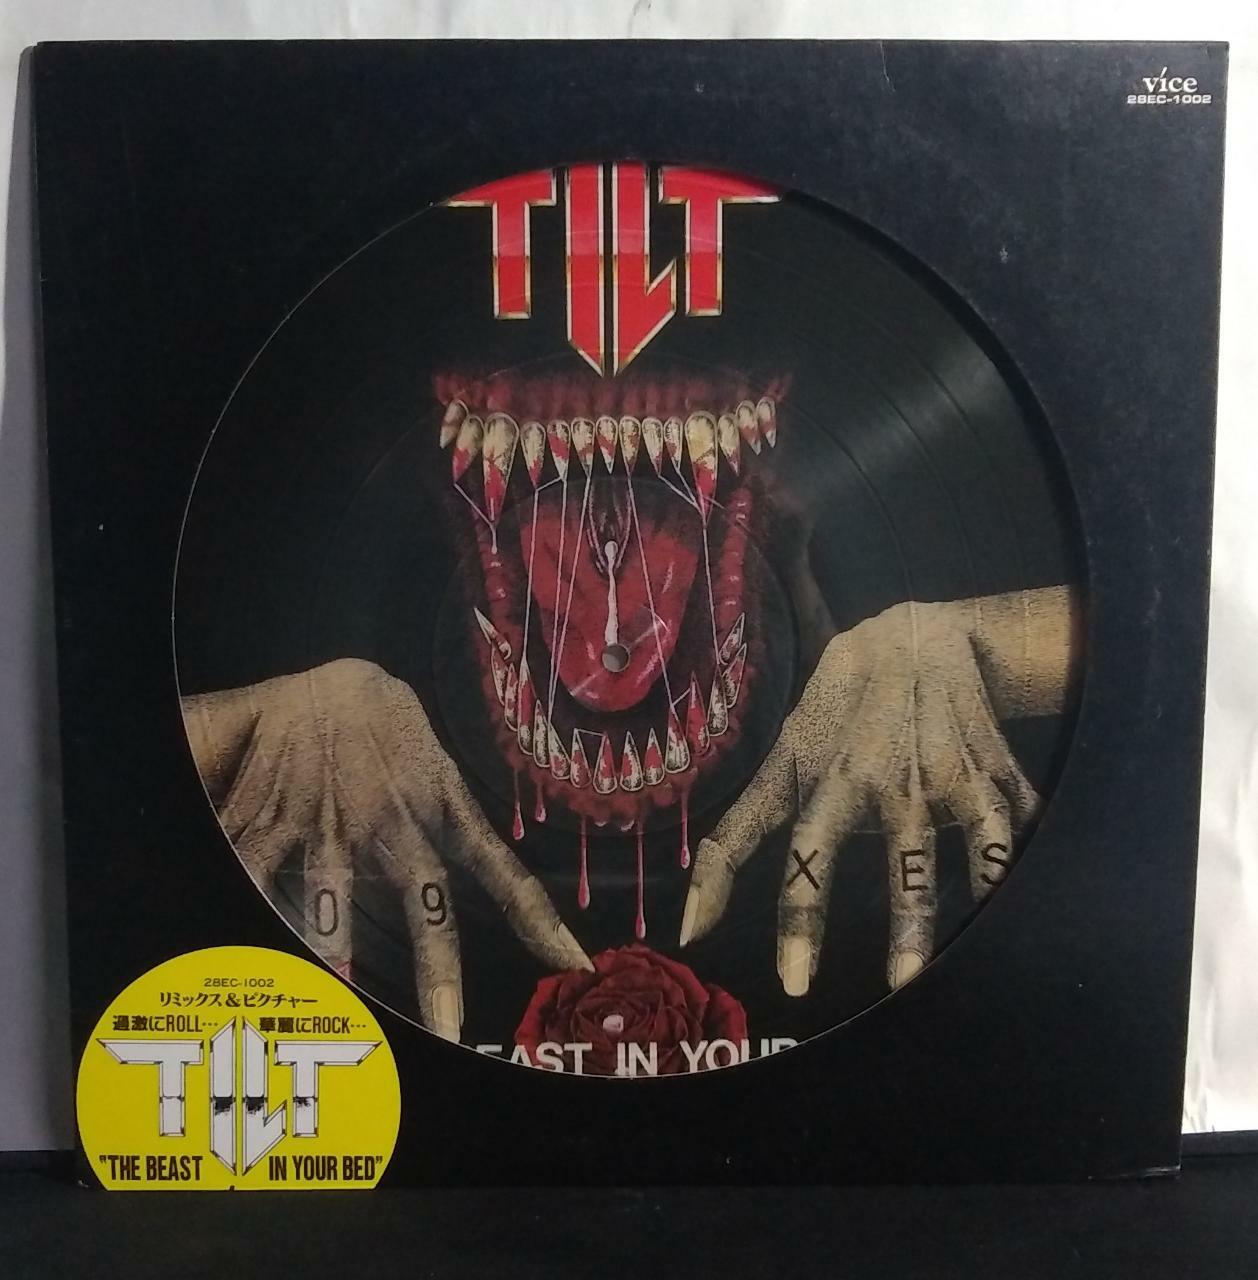 Vinil - Tilt - The Beast in your Bed (Japan/Picture)